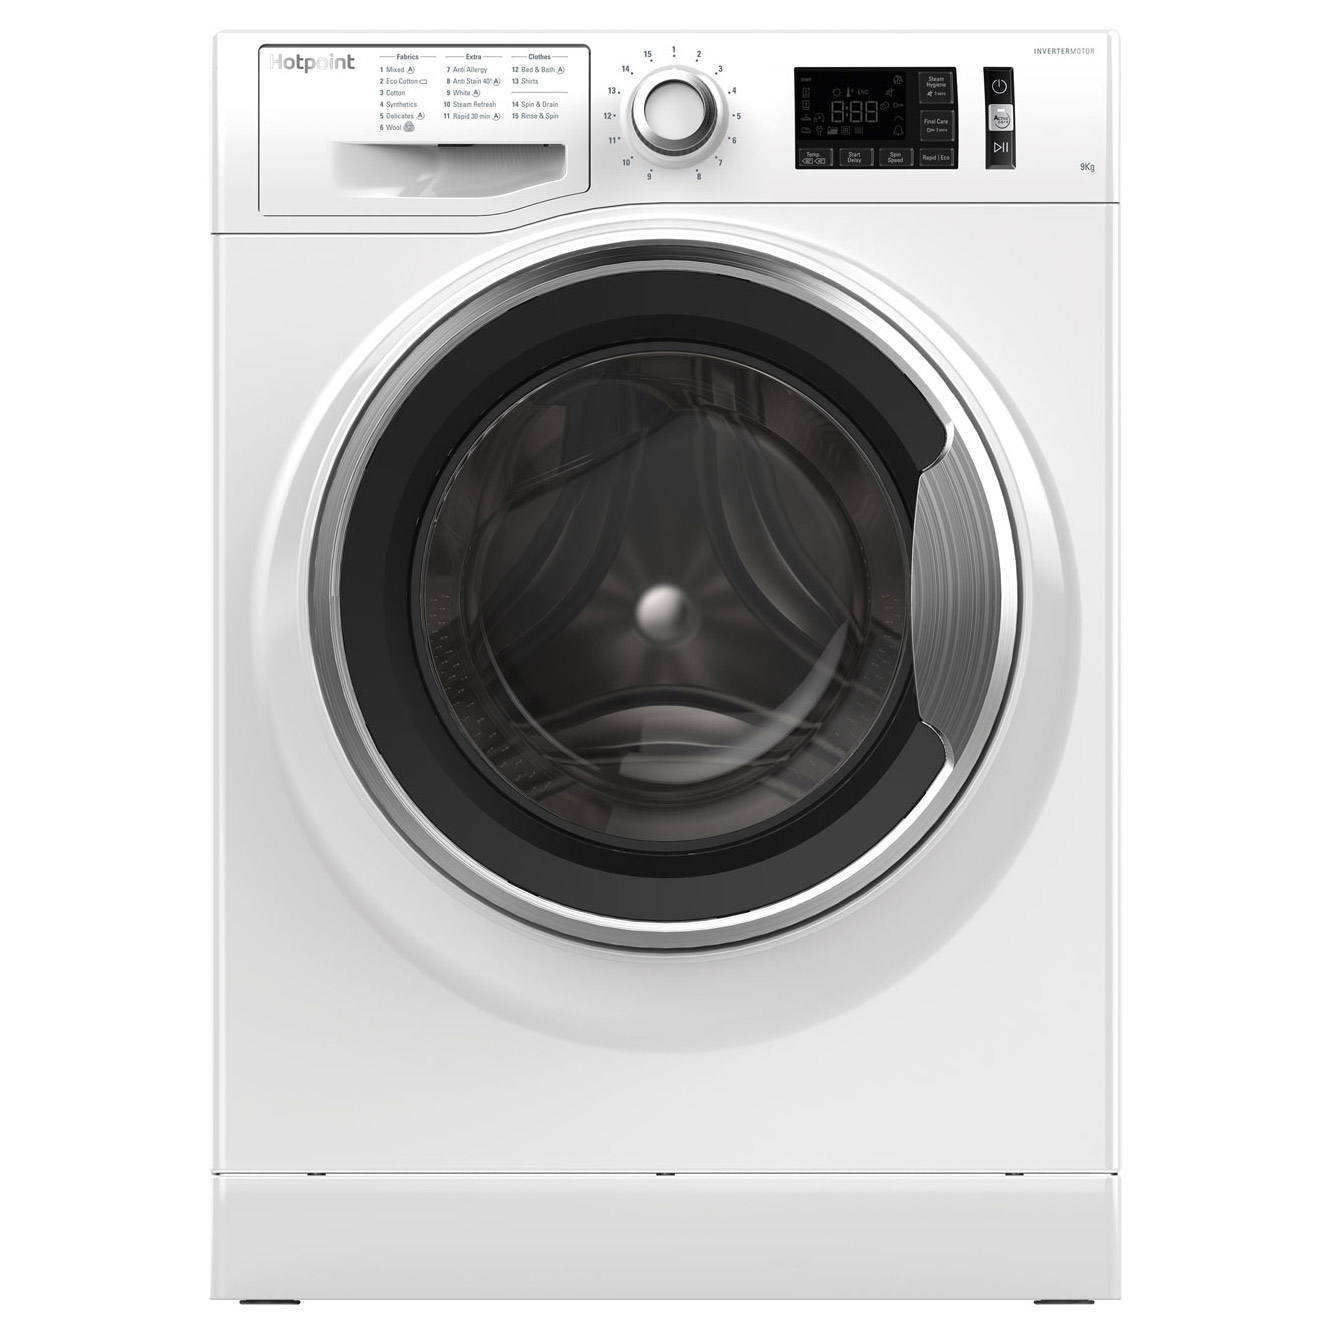 Hotpoint NM11946WCA Washing Machine in White 1400rpm 9Kg A Rated